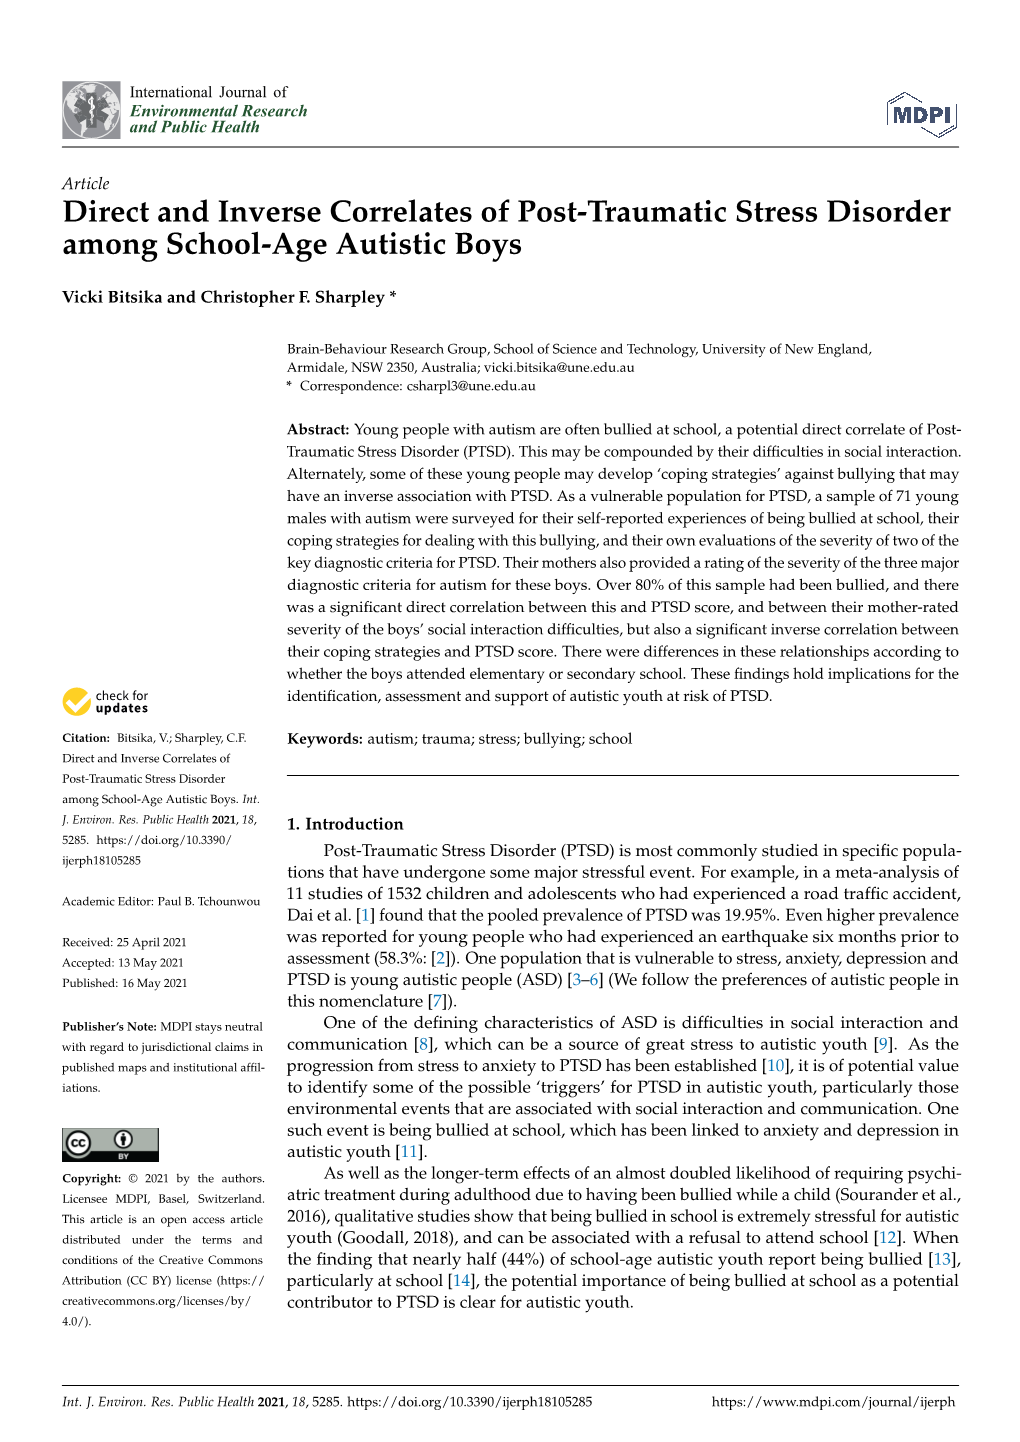 Direct and Inverse Correlates of Post-Traumatic Stress Disorder Among School-Age Autistic Boys